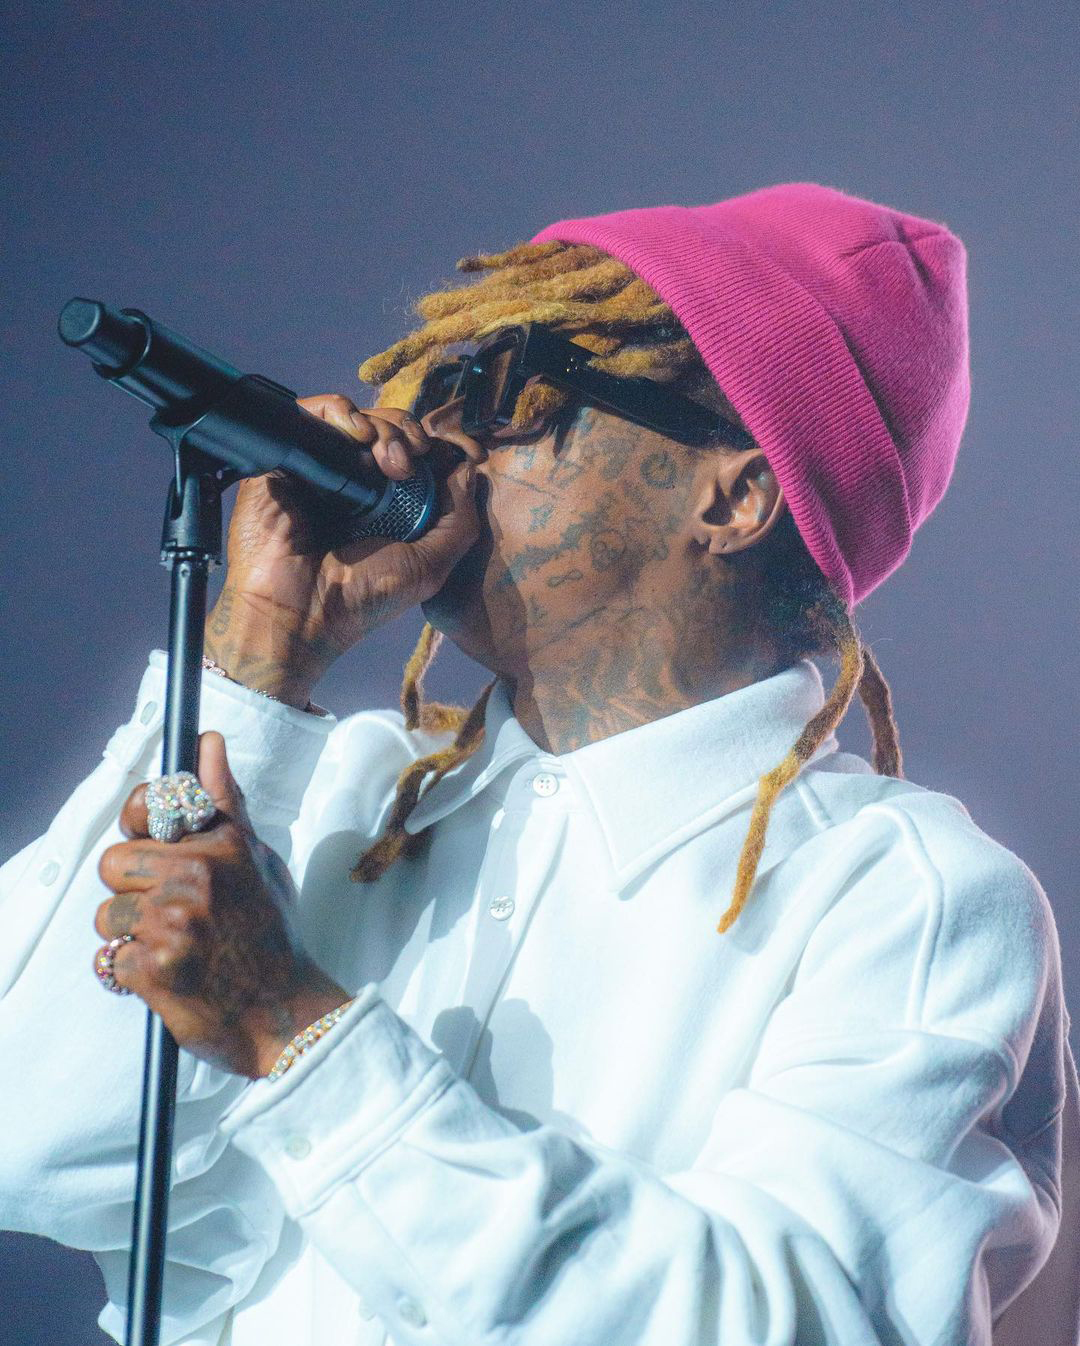 Lil Wayne Performs She Will, Money On My Mind & More Live At The Rio Rancho Events Center